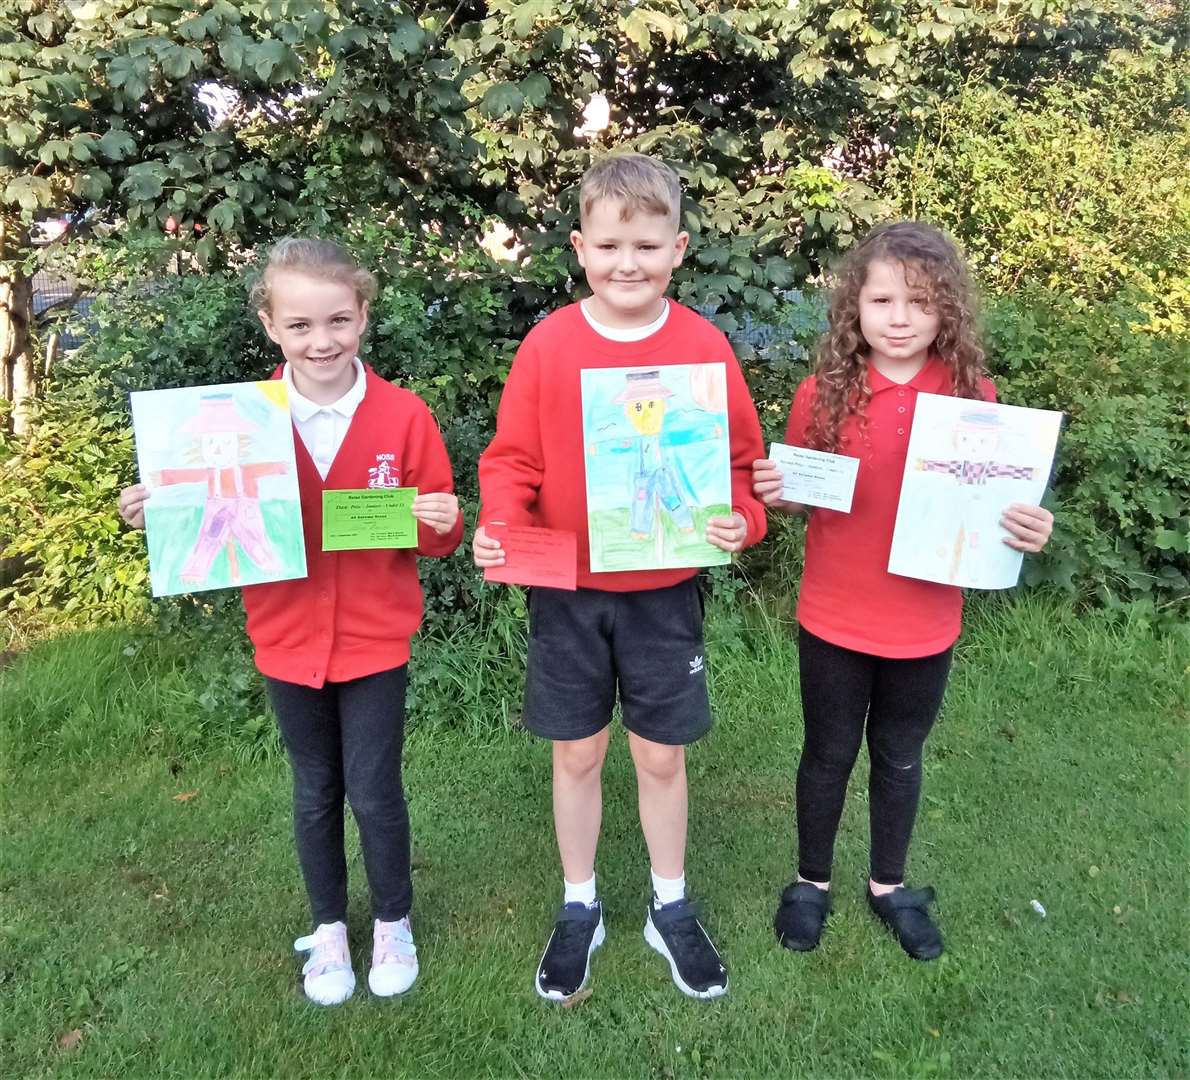 Noss Primary pupils Kyle Chalmers won first place, Amber Mcphee won second place and Abbie Duncan won third place in the junior art section.